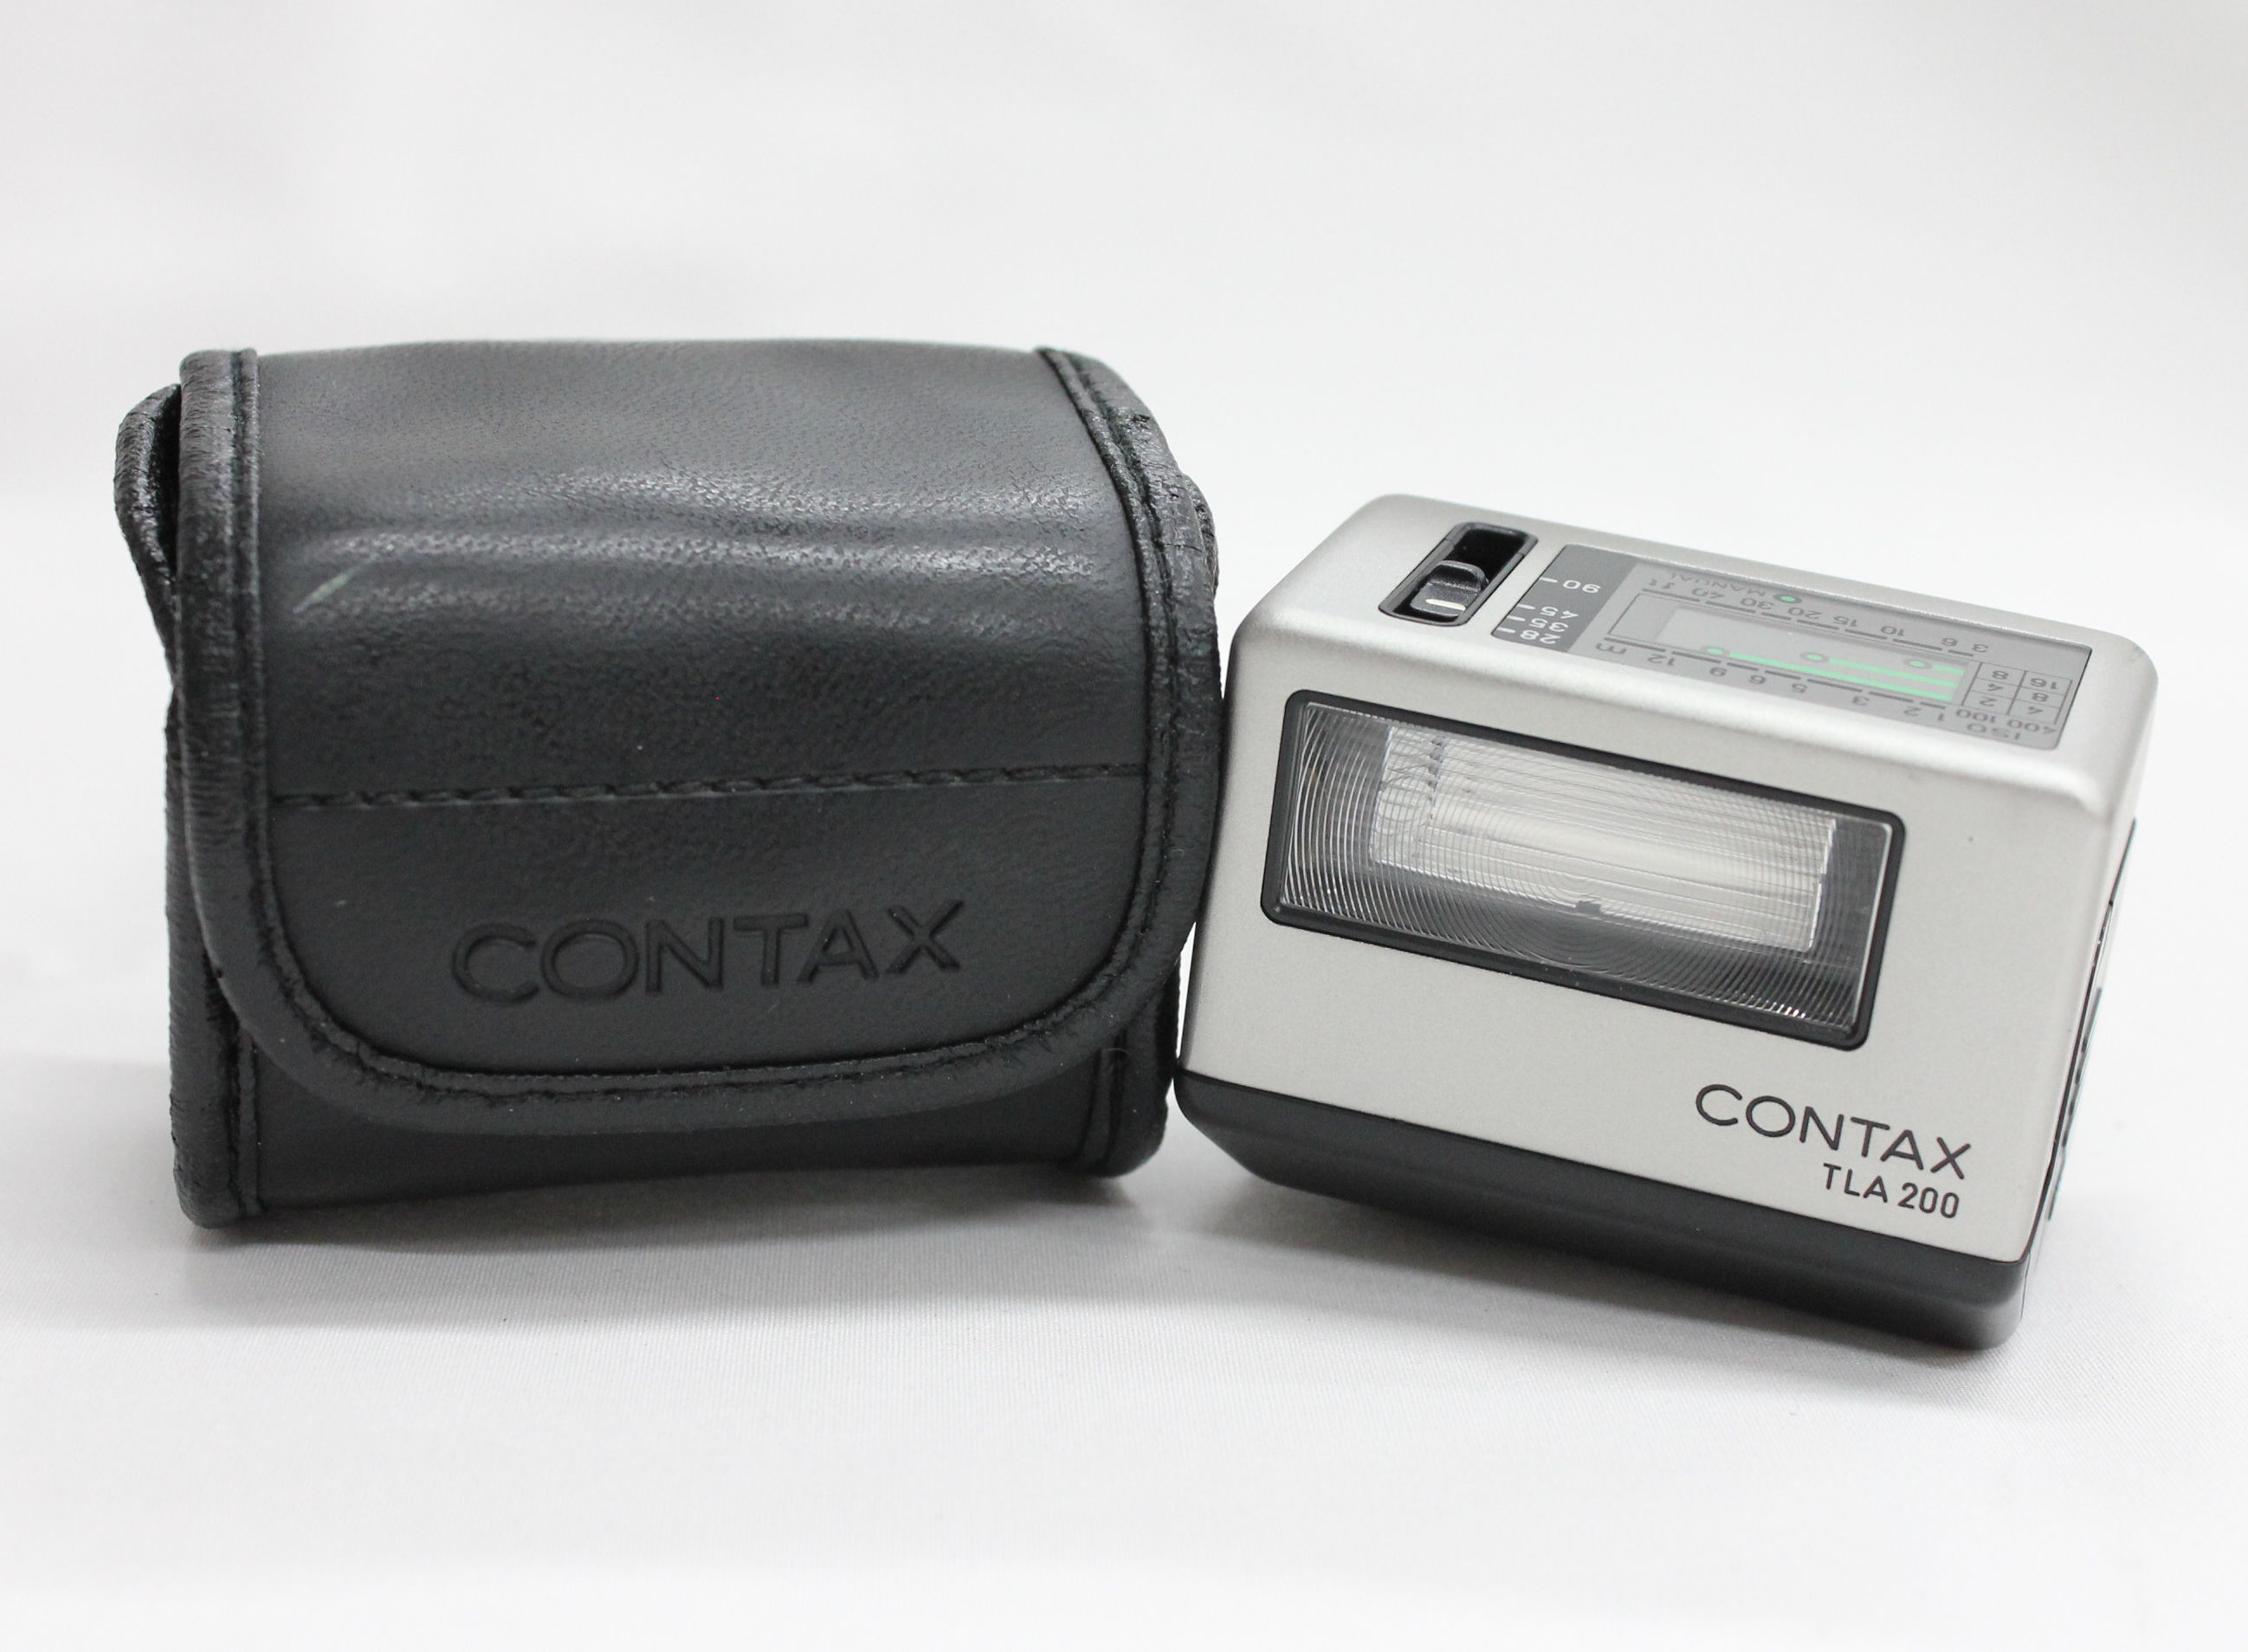 [Mint] Contax TLA 200 Shoe Mount Flash w / Leather Case for G1 G2 from Japan